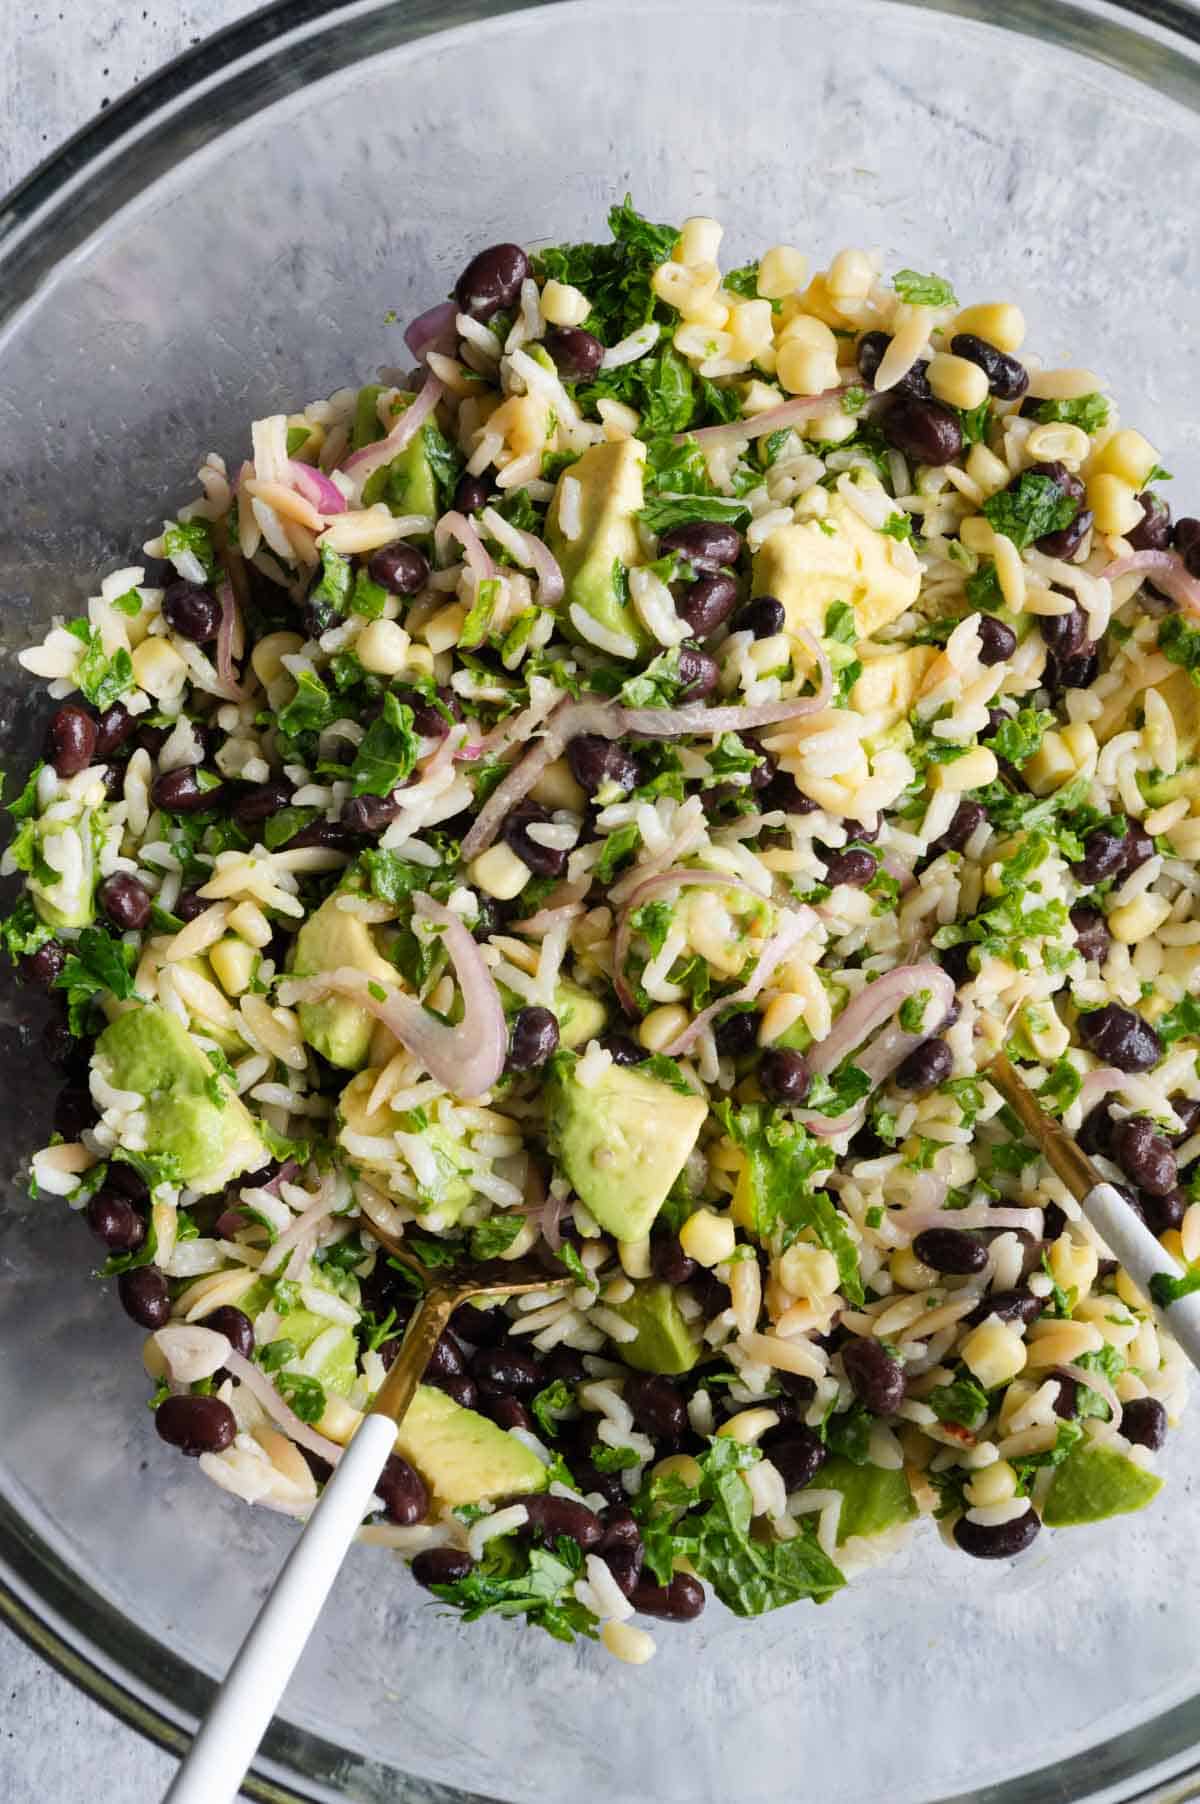 Black beans, avocado, corn, shallots, cilantro, kale, and orzo rice in a glass bowl.